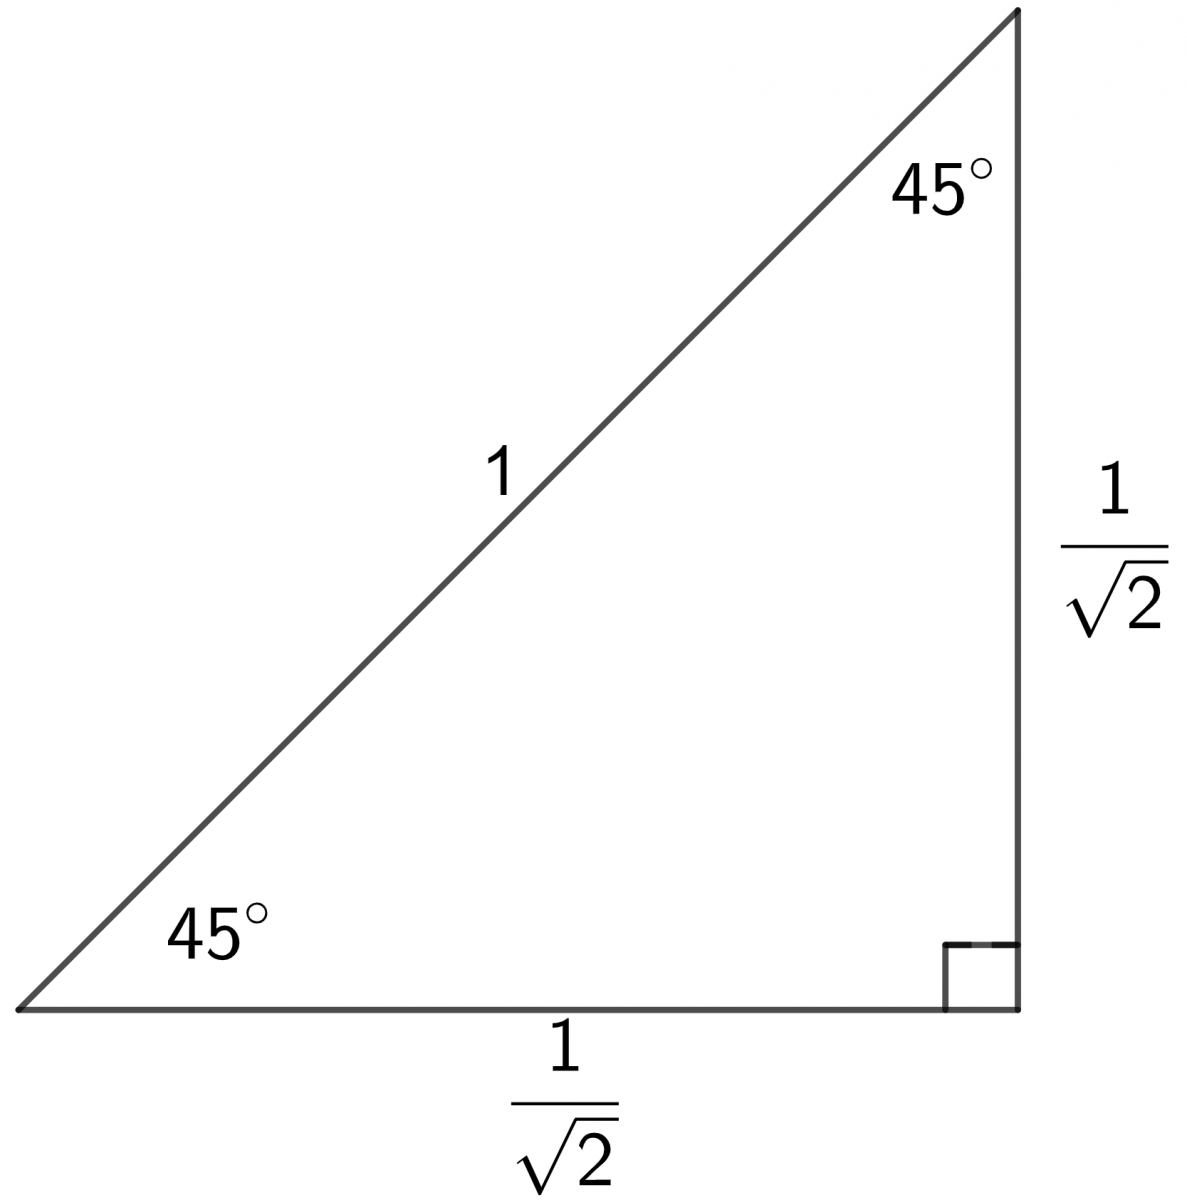 a right angled triangle with both smaller angles equal to 45 degrees the hypotenuse is one unit and the two other sides are one over root two